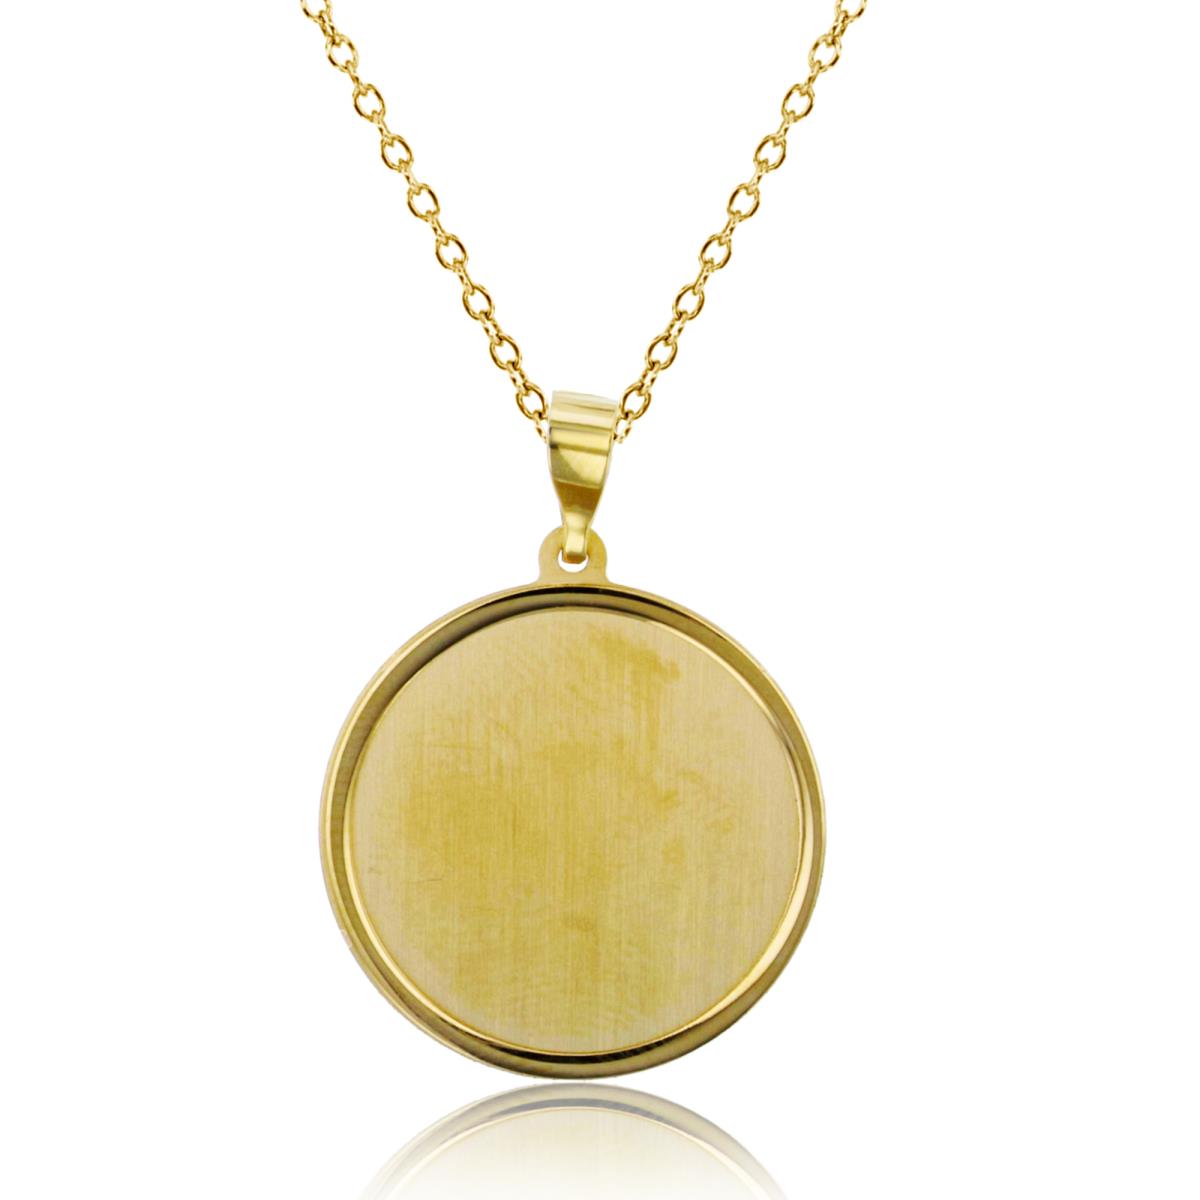 14K Yellow Gold 25x18mm Engravable Satin Medallion 18" Necklace